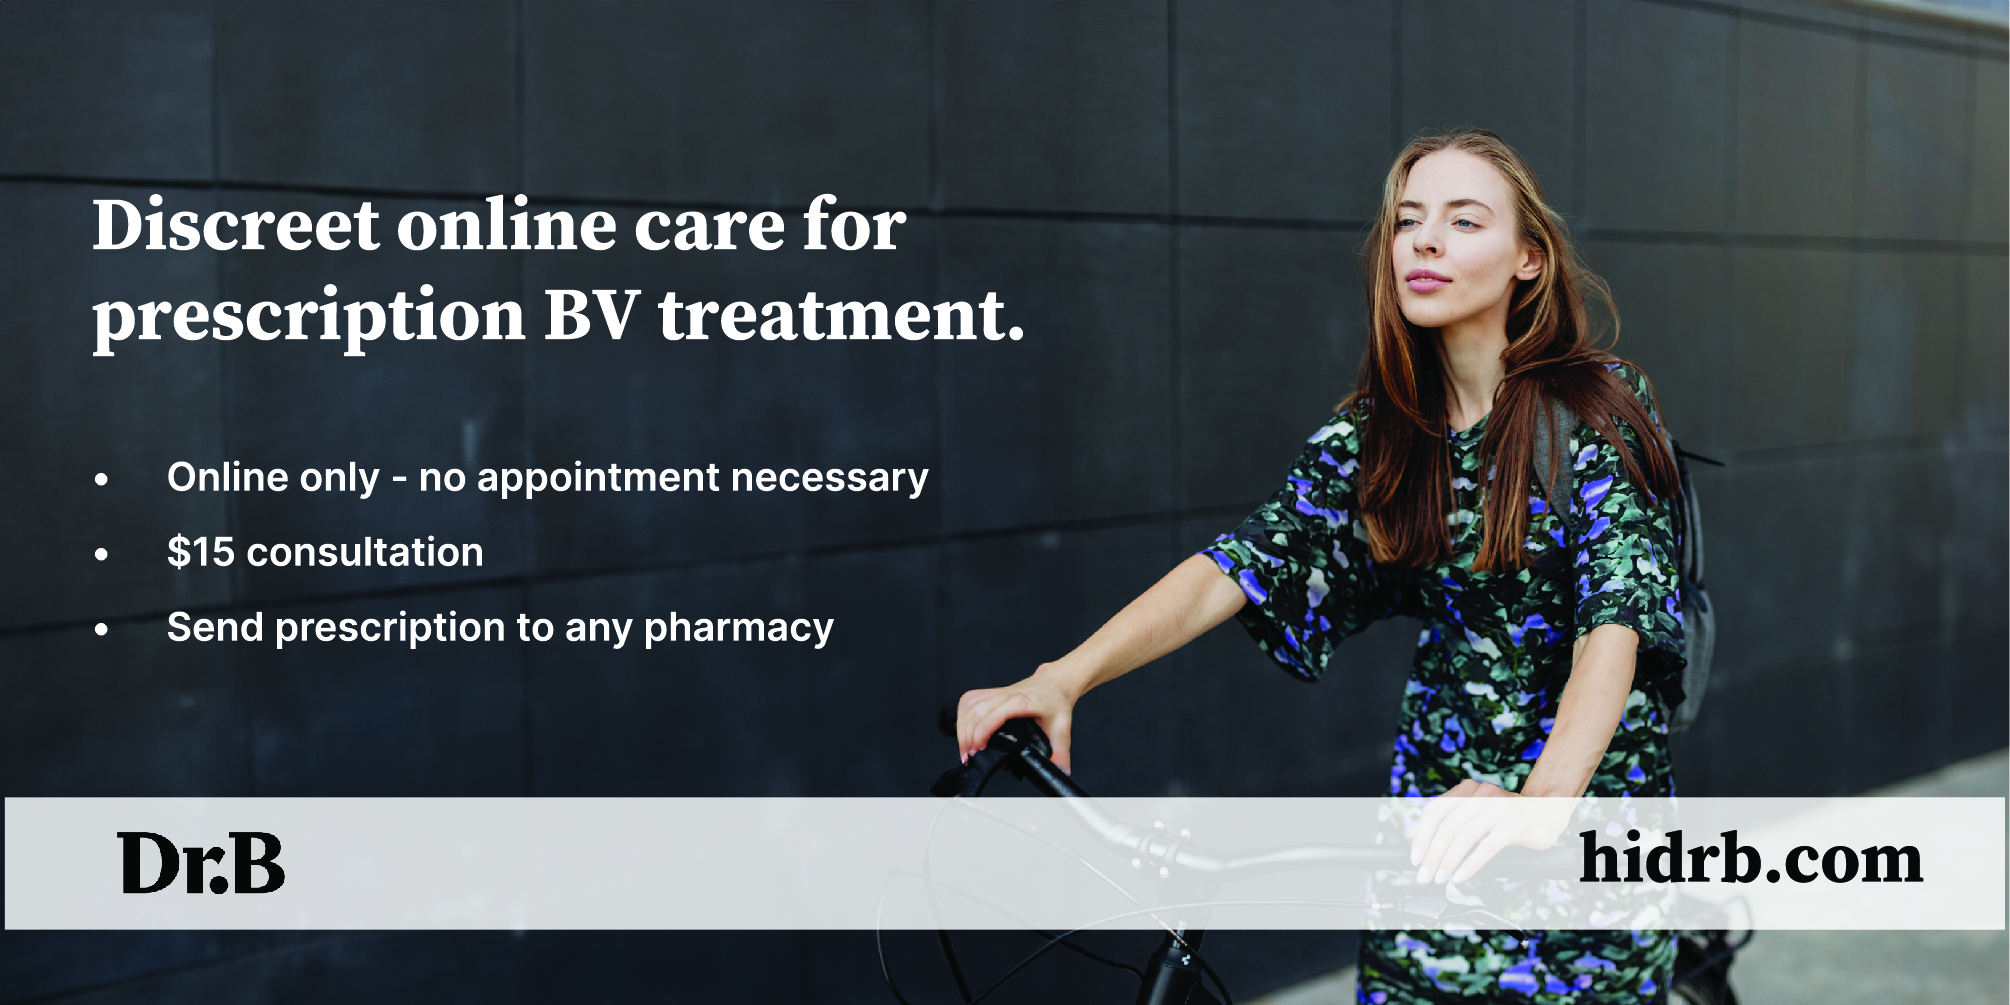 Banner advertising Dr. B's services for bacterial vaginosis treatments